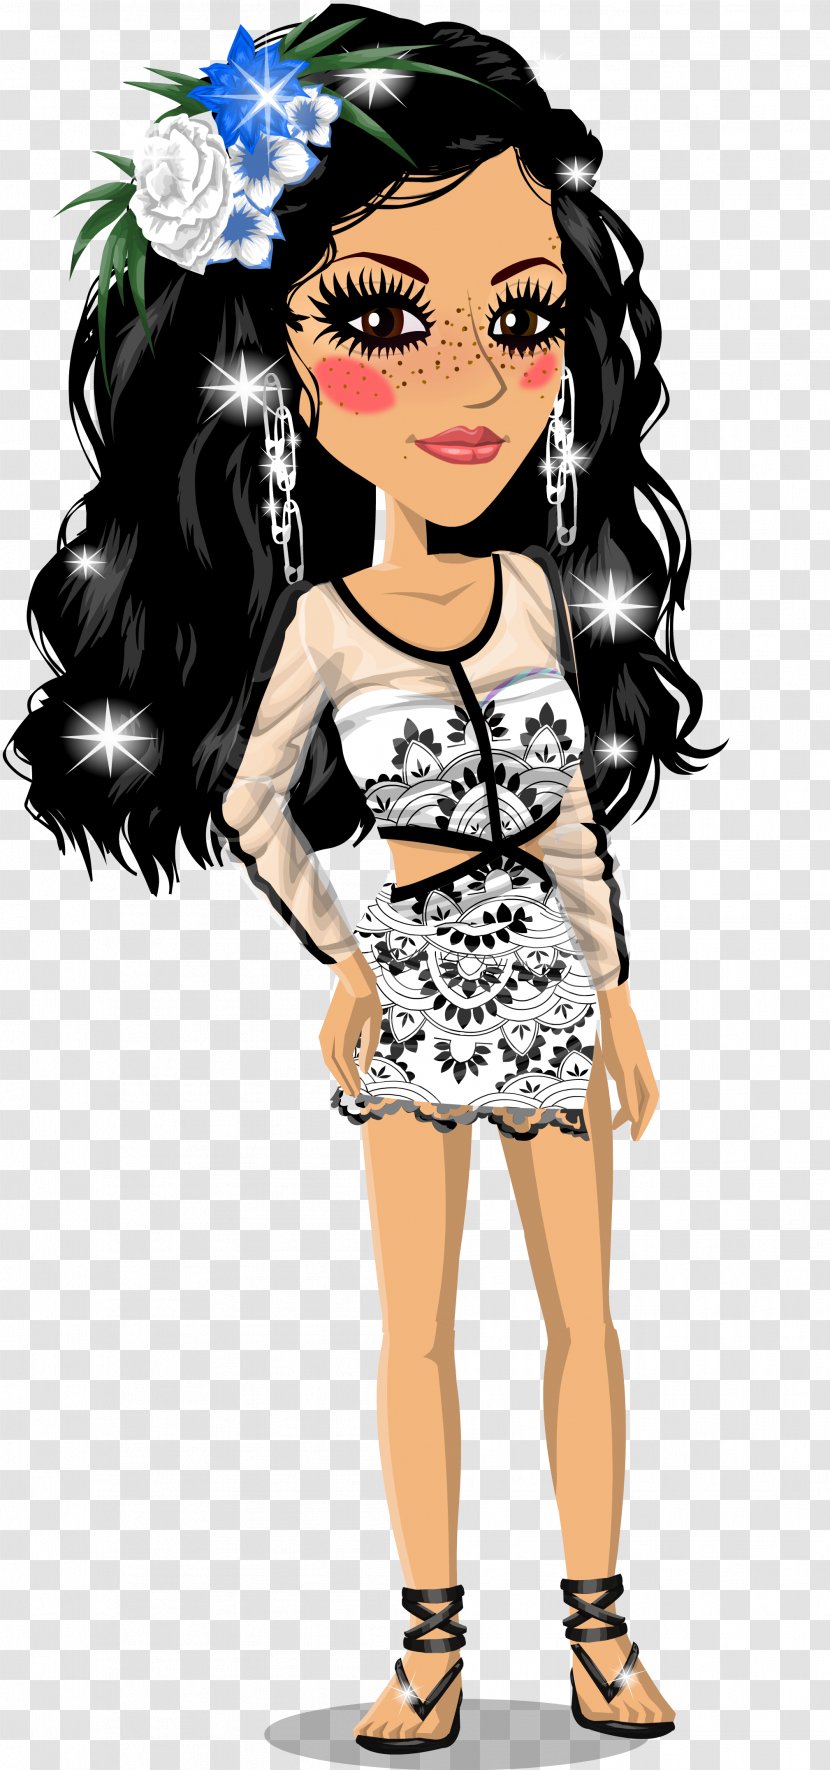 MovieStarPlanet Android Game - Frame Transparent PNG